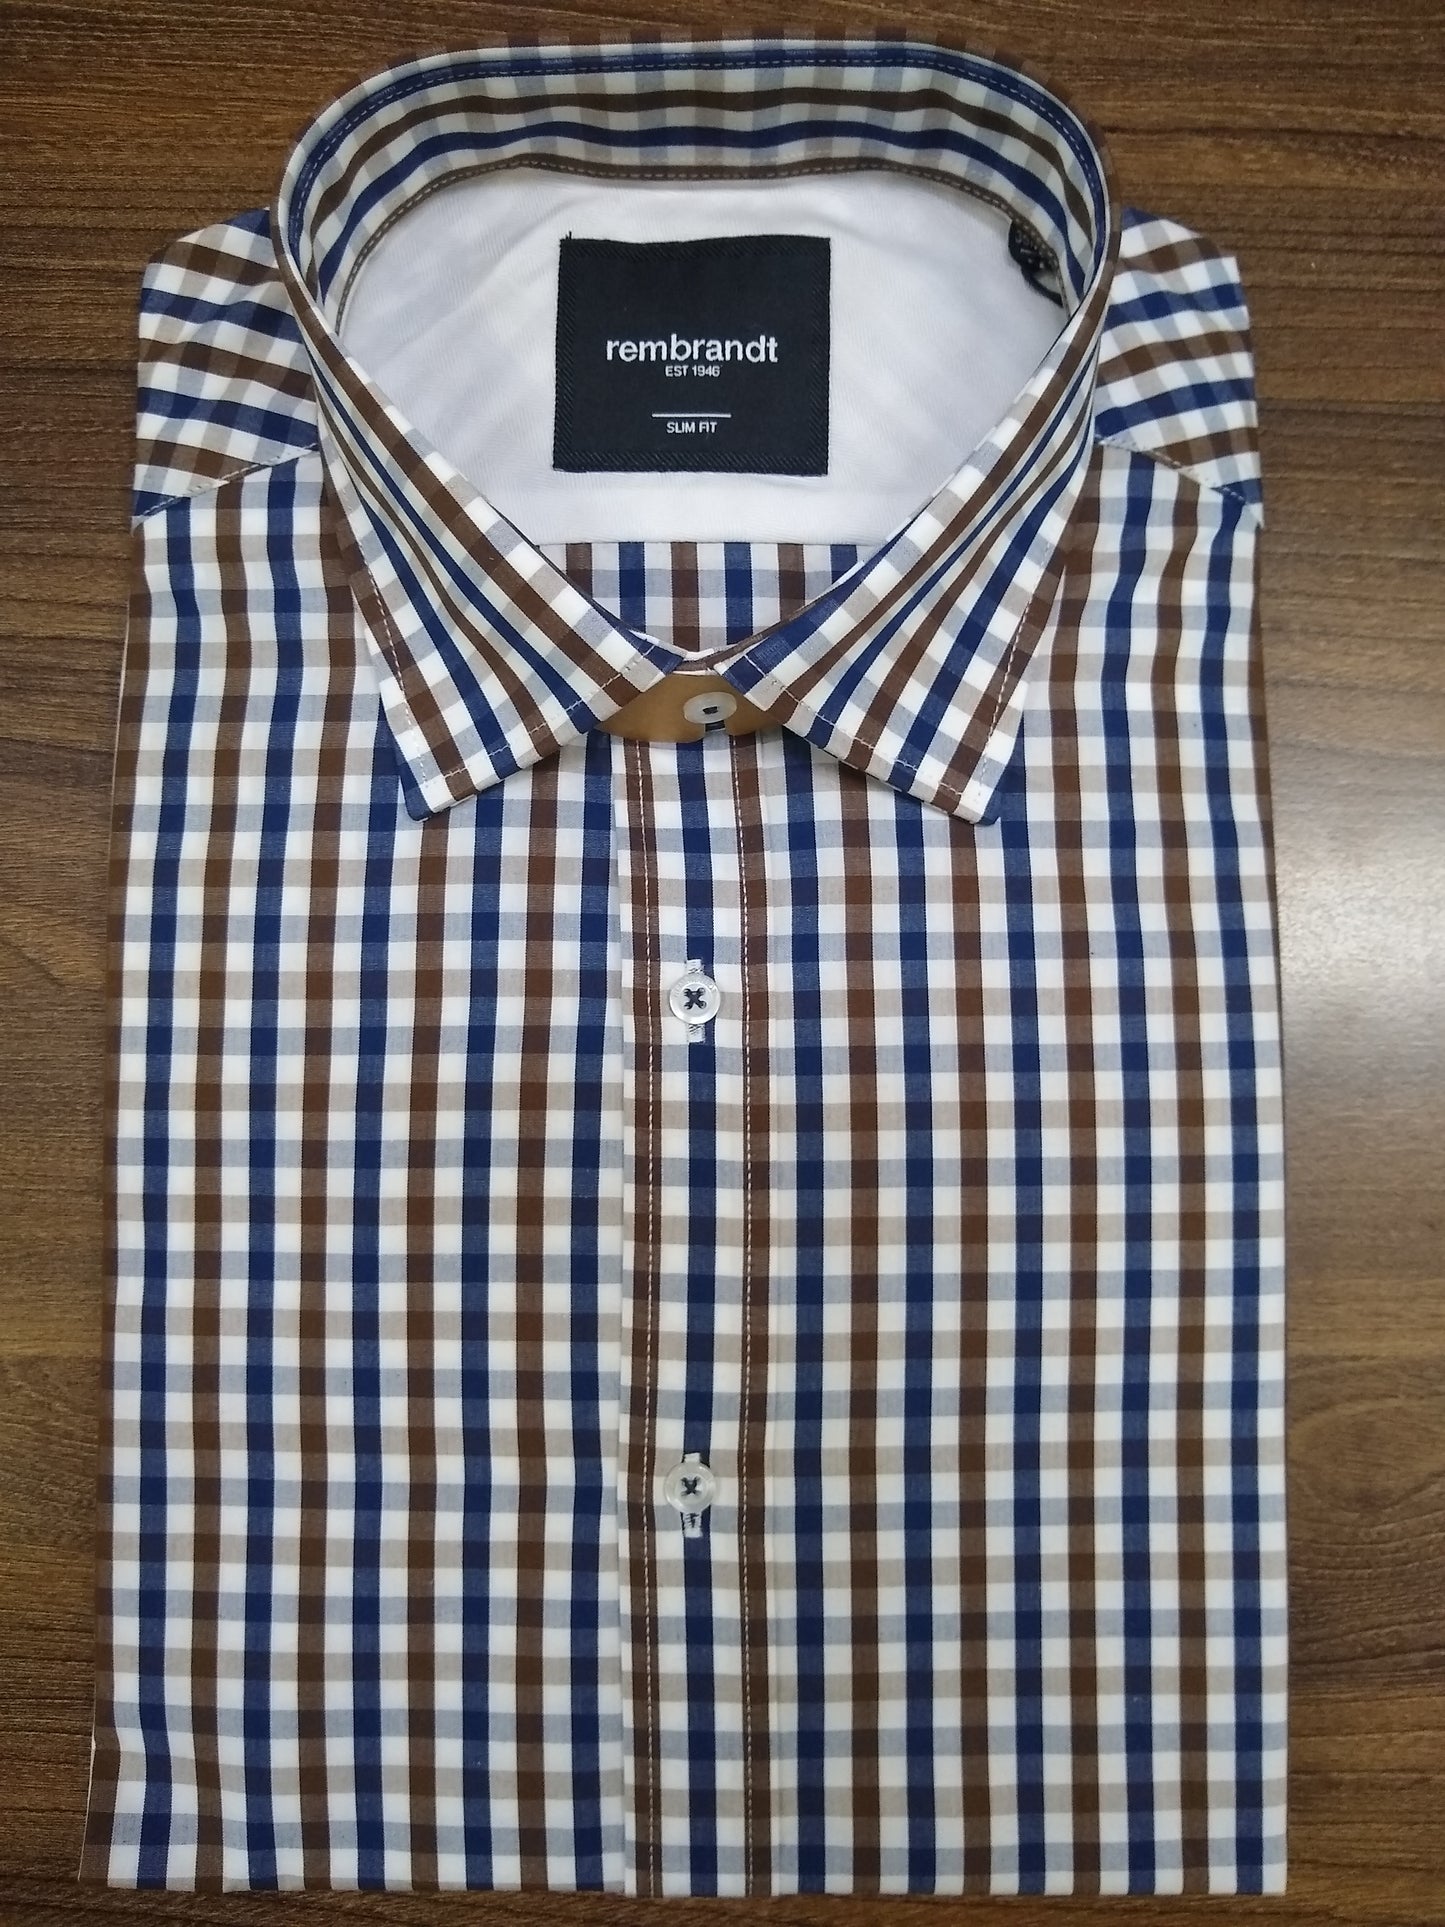 Rembrandt London Brown Navy and White Check Long Sleeve Shirt